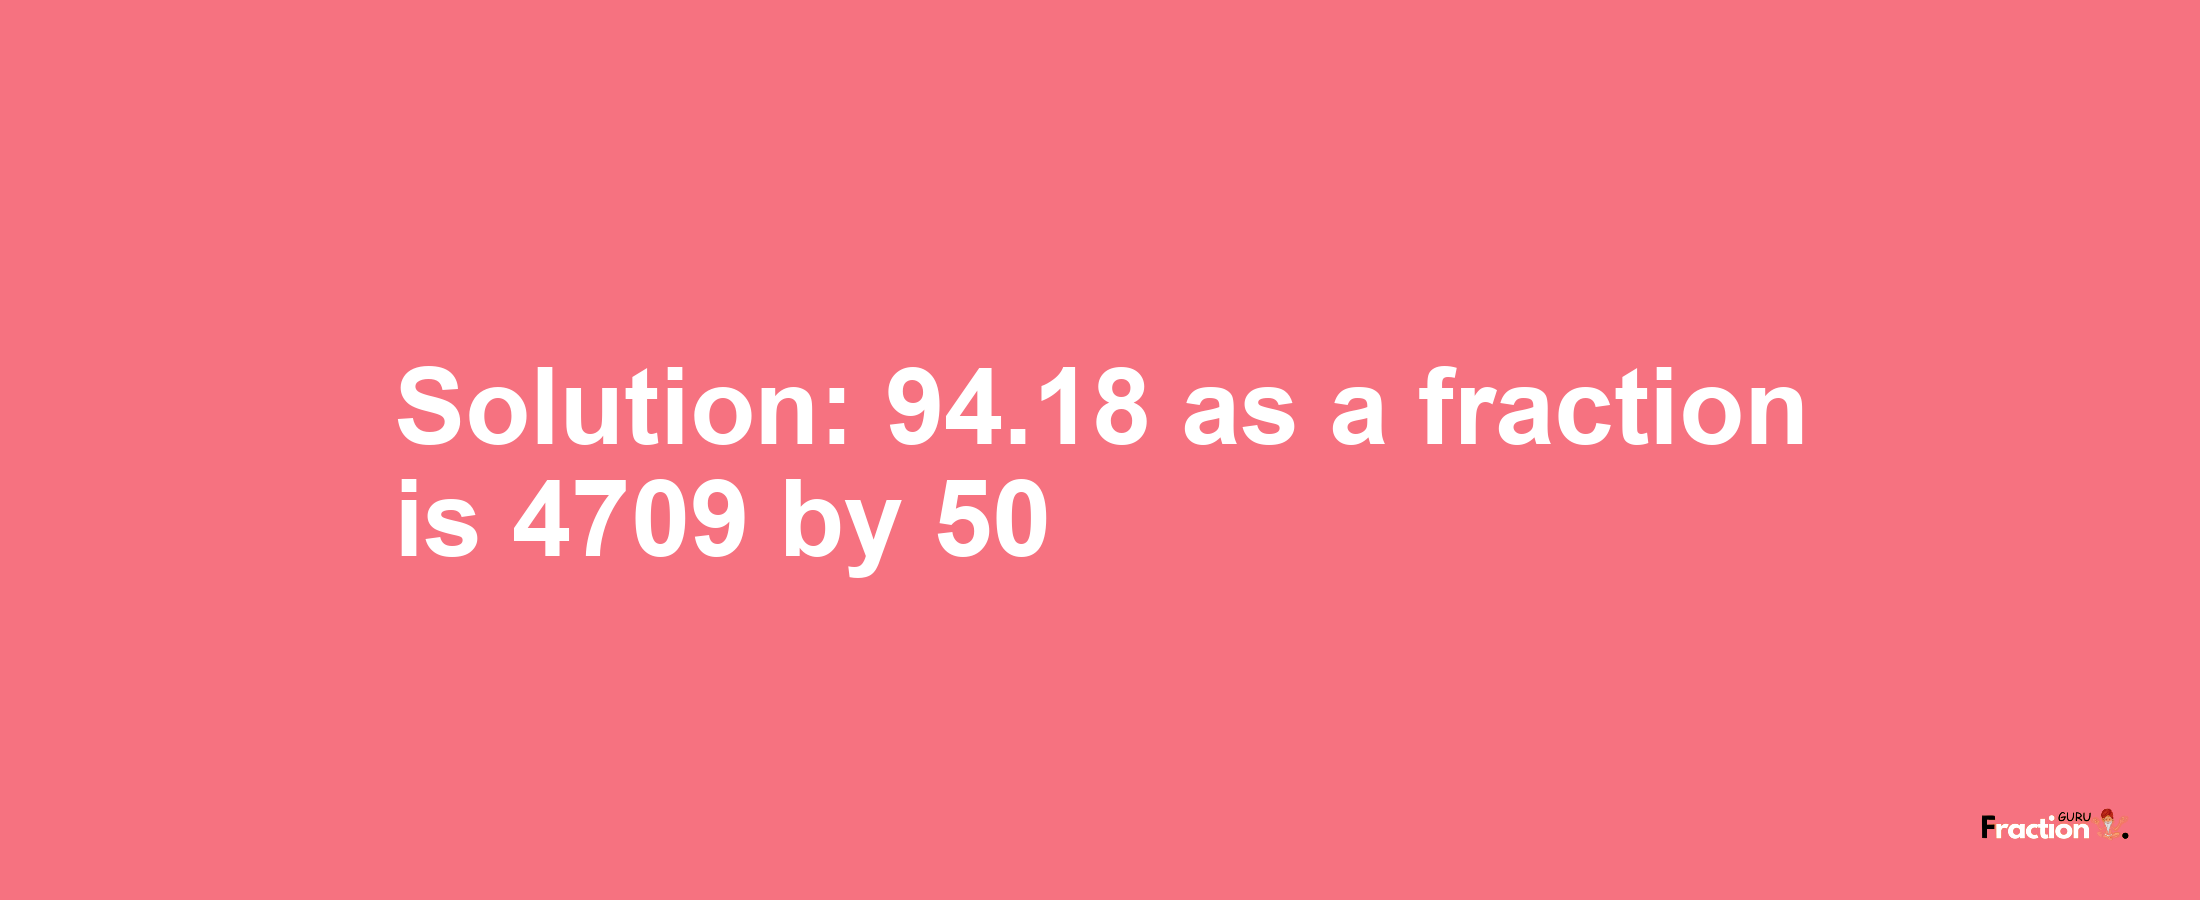 Solution:94.18 as a fraction is 4709/50